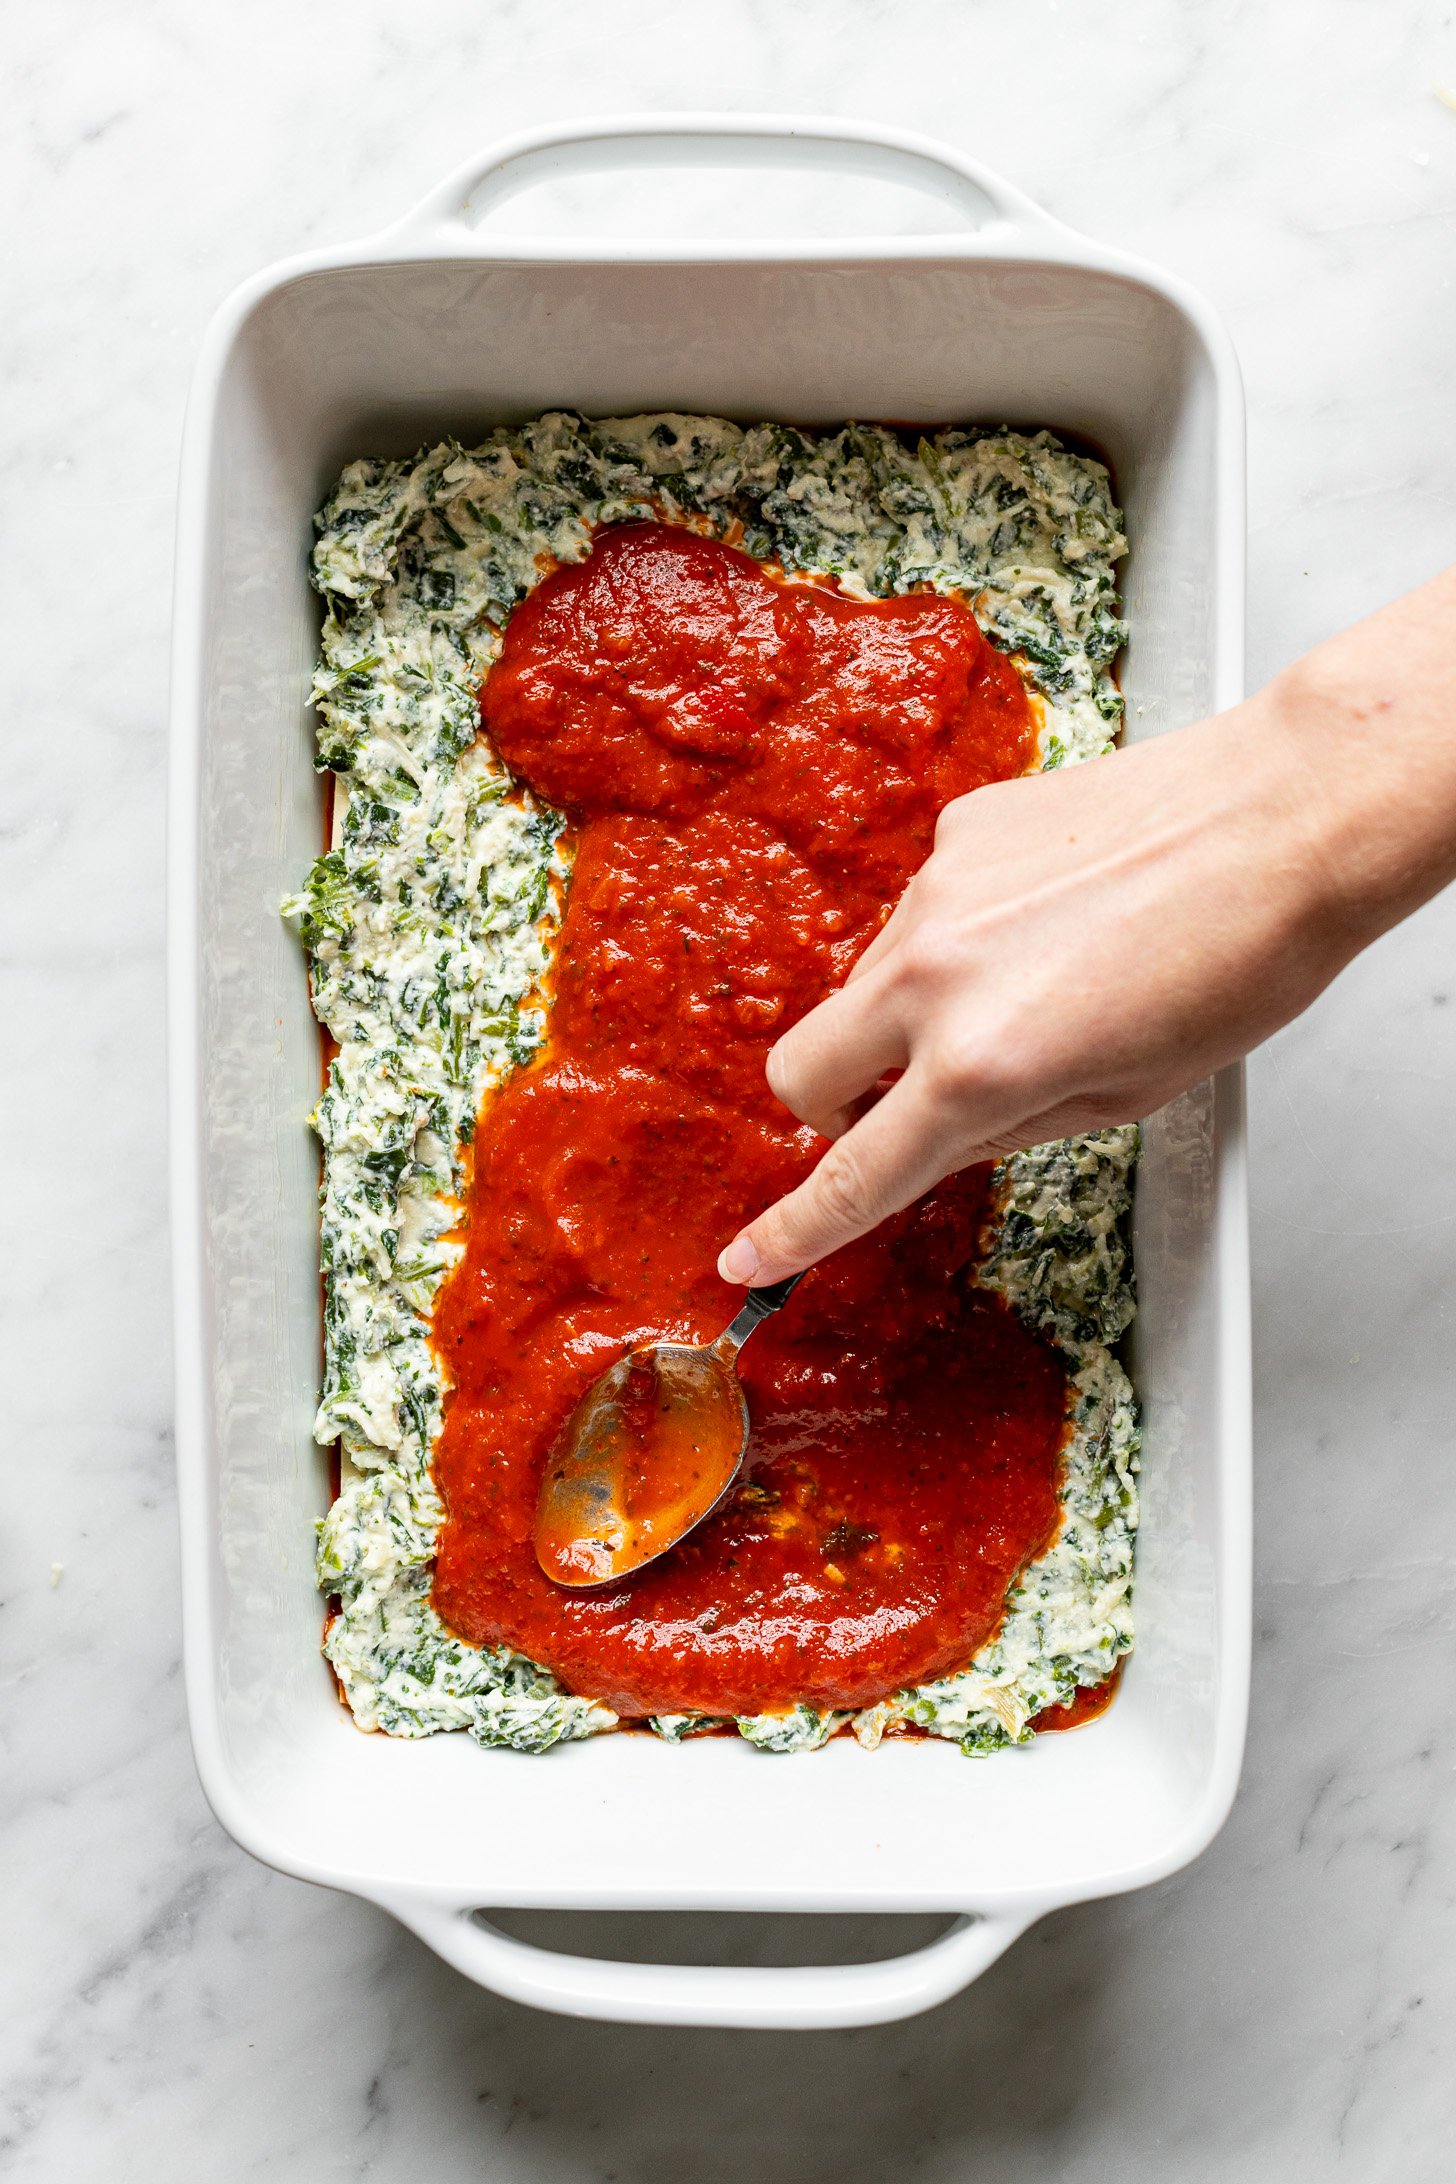 A hand holding a spoon is spreading marinara sauce over the ricotta mixture in a white baking dish.